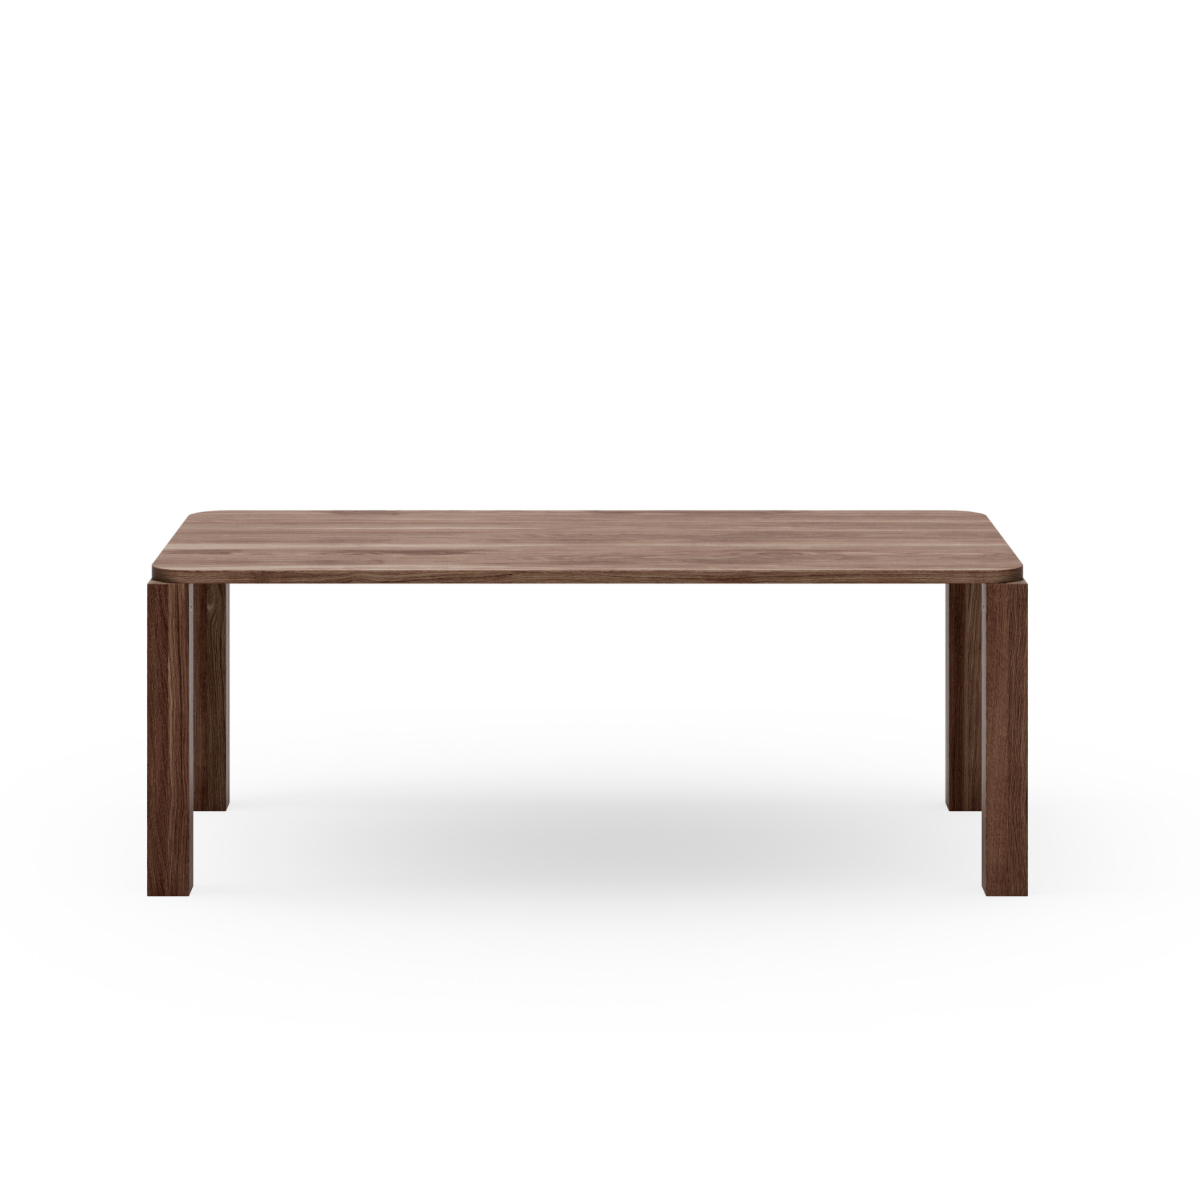 New Works Atlas Dining Table - 200x95